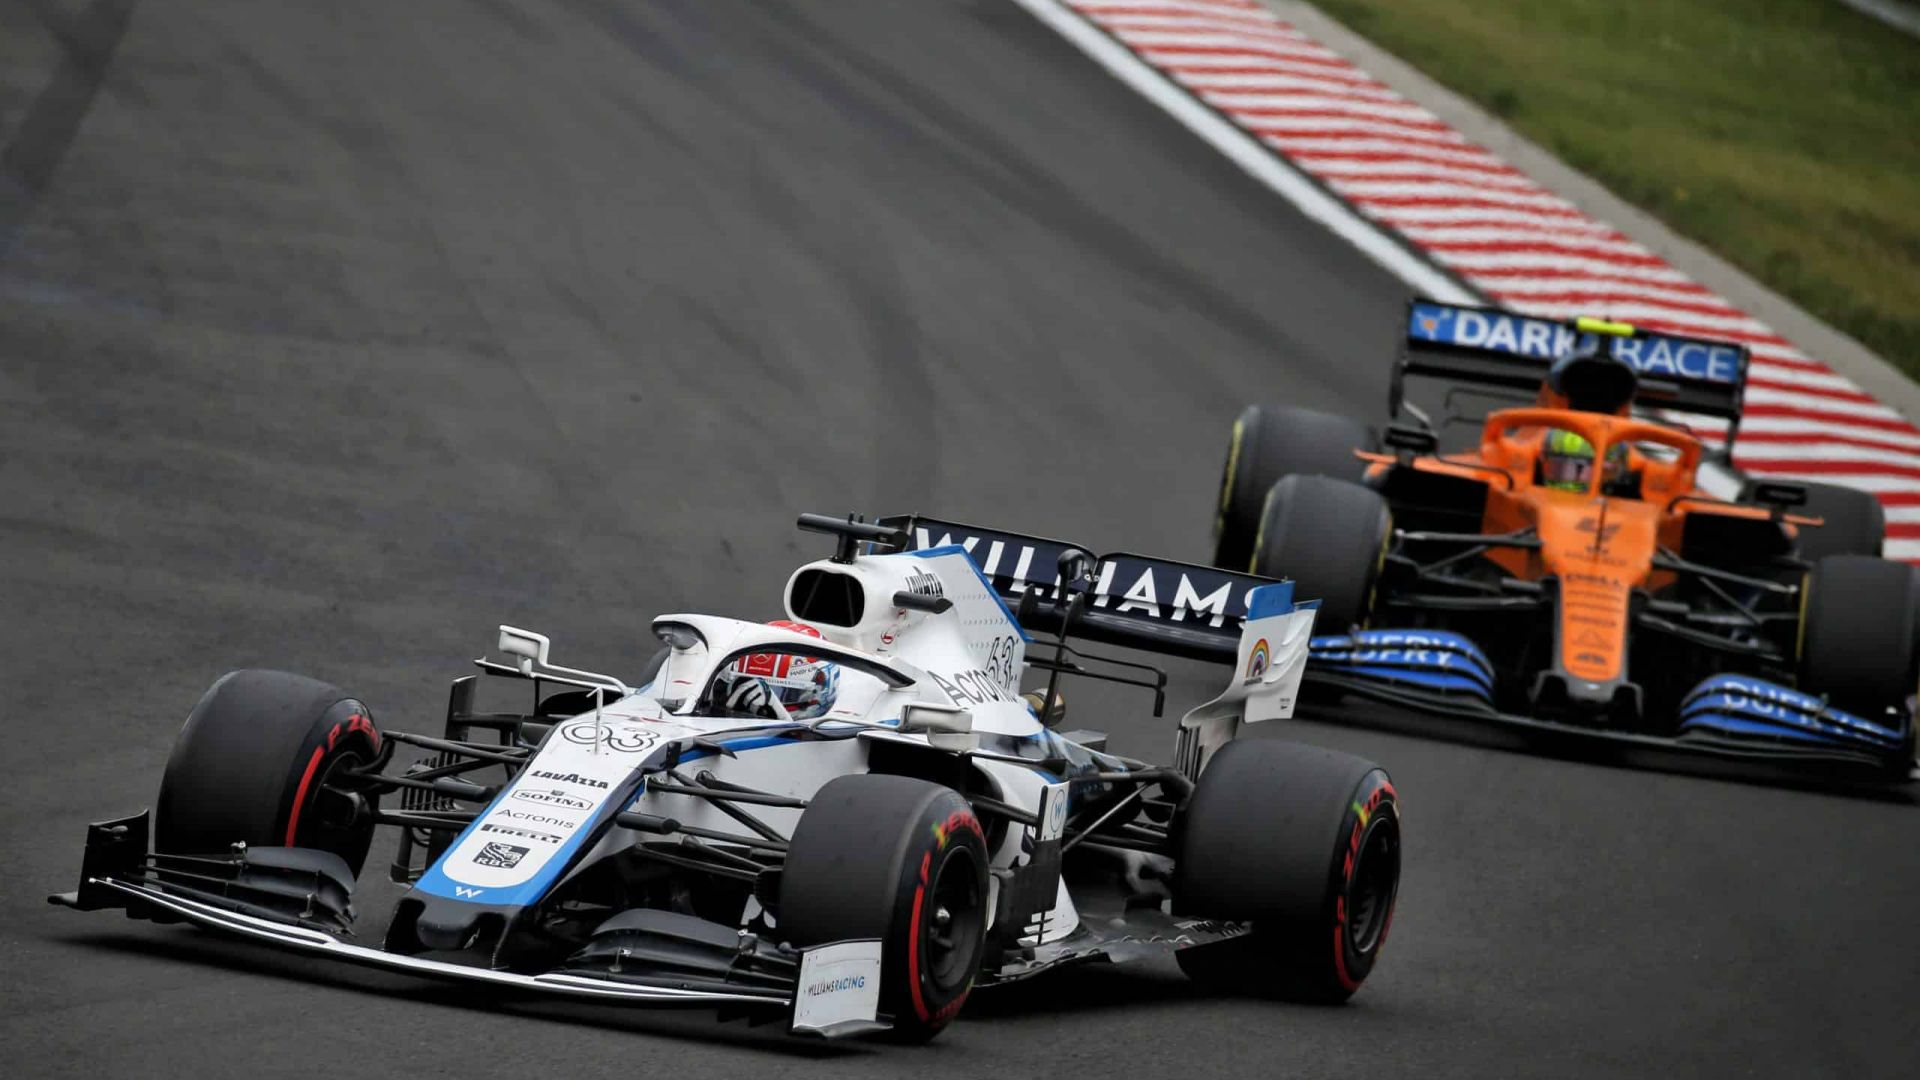 Williams and McLaren are two teams set to sign the Concorde Agreement